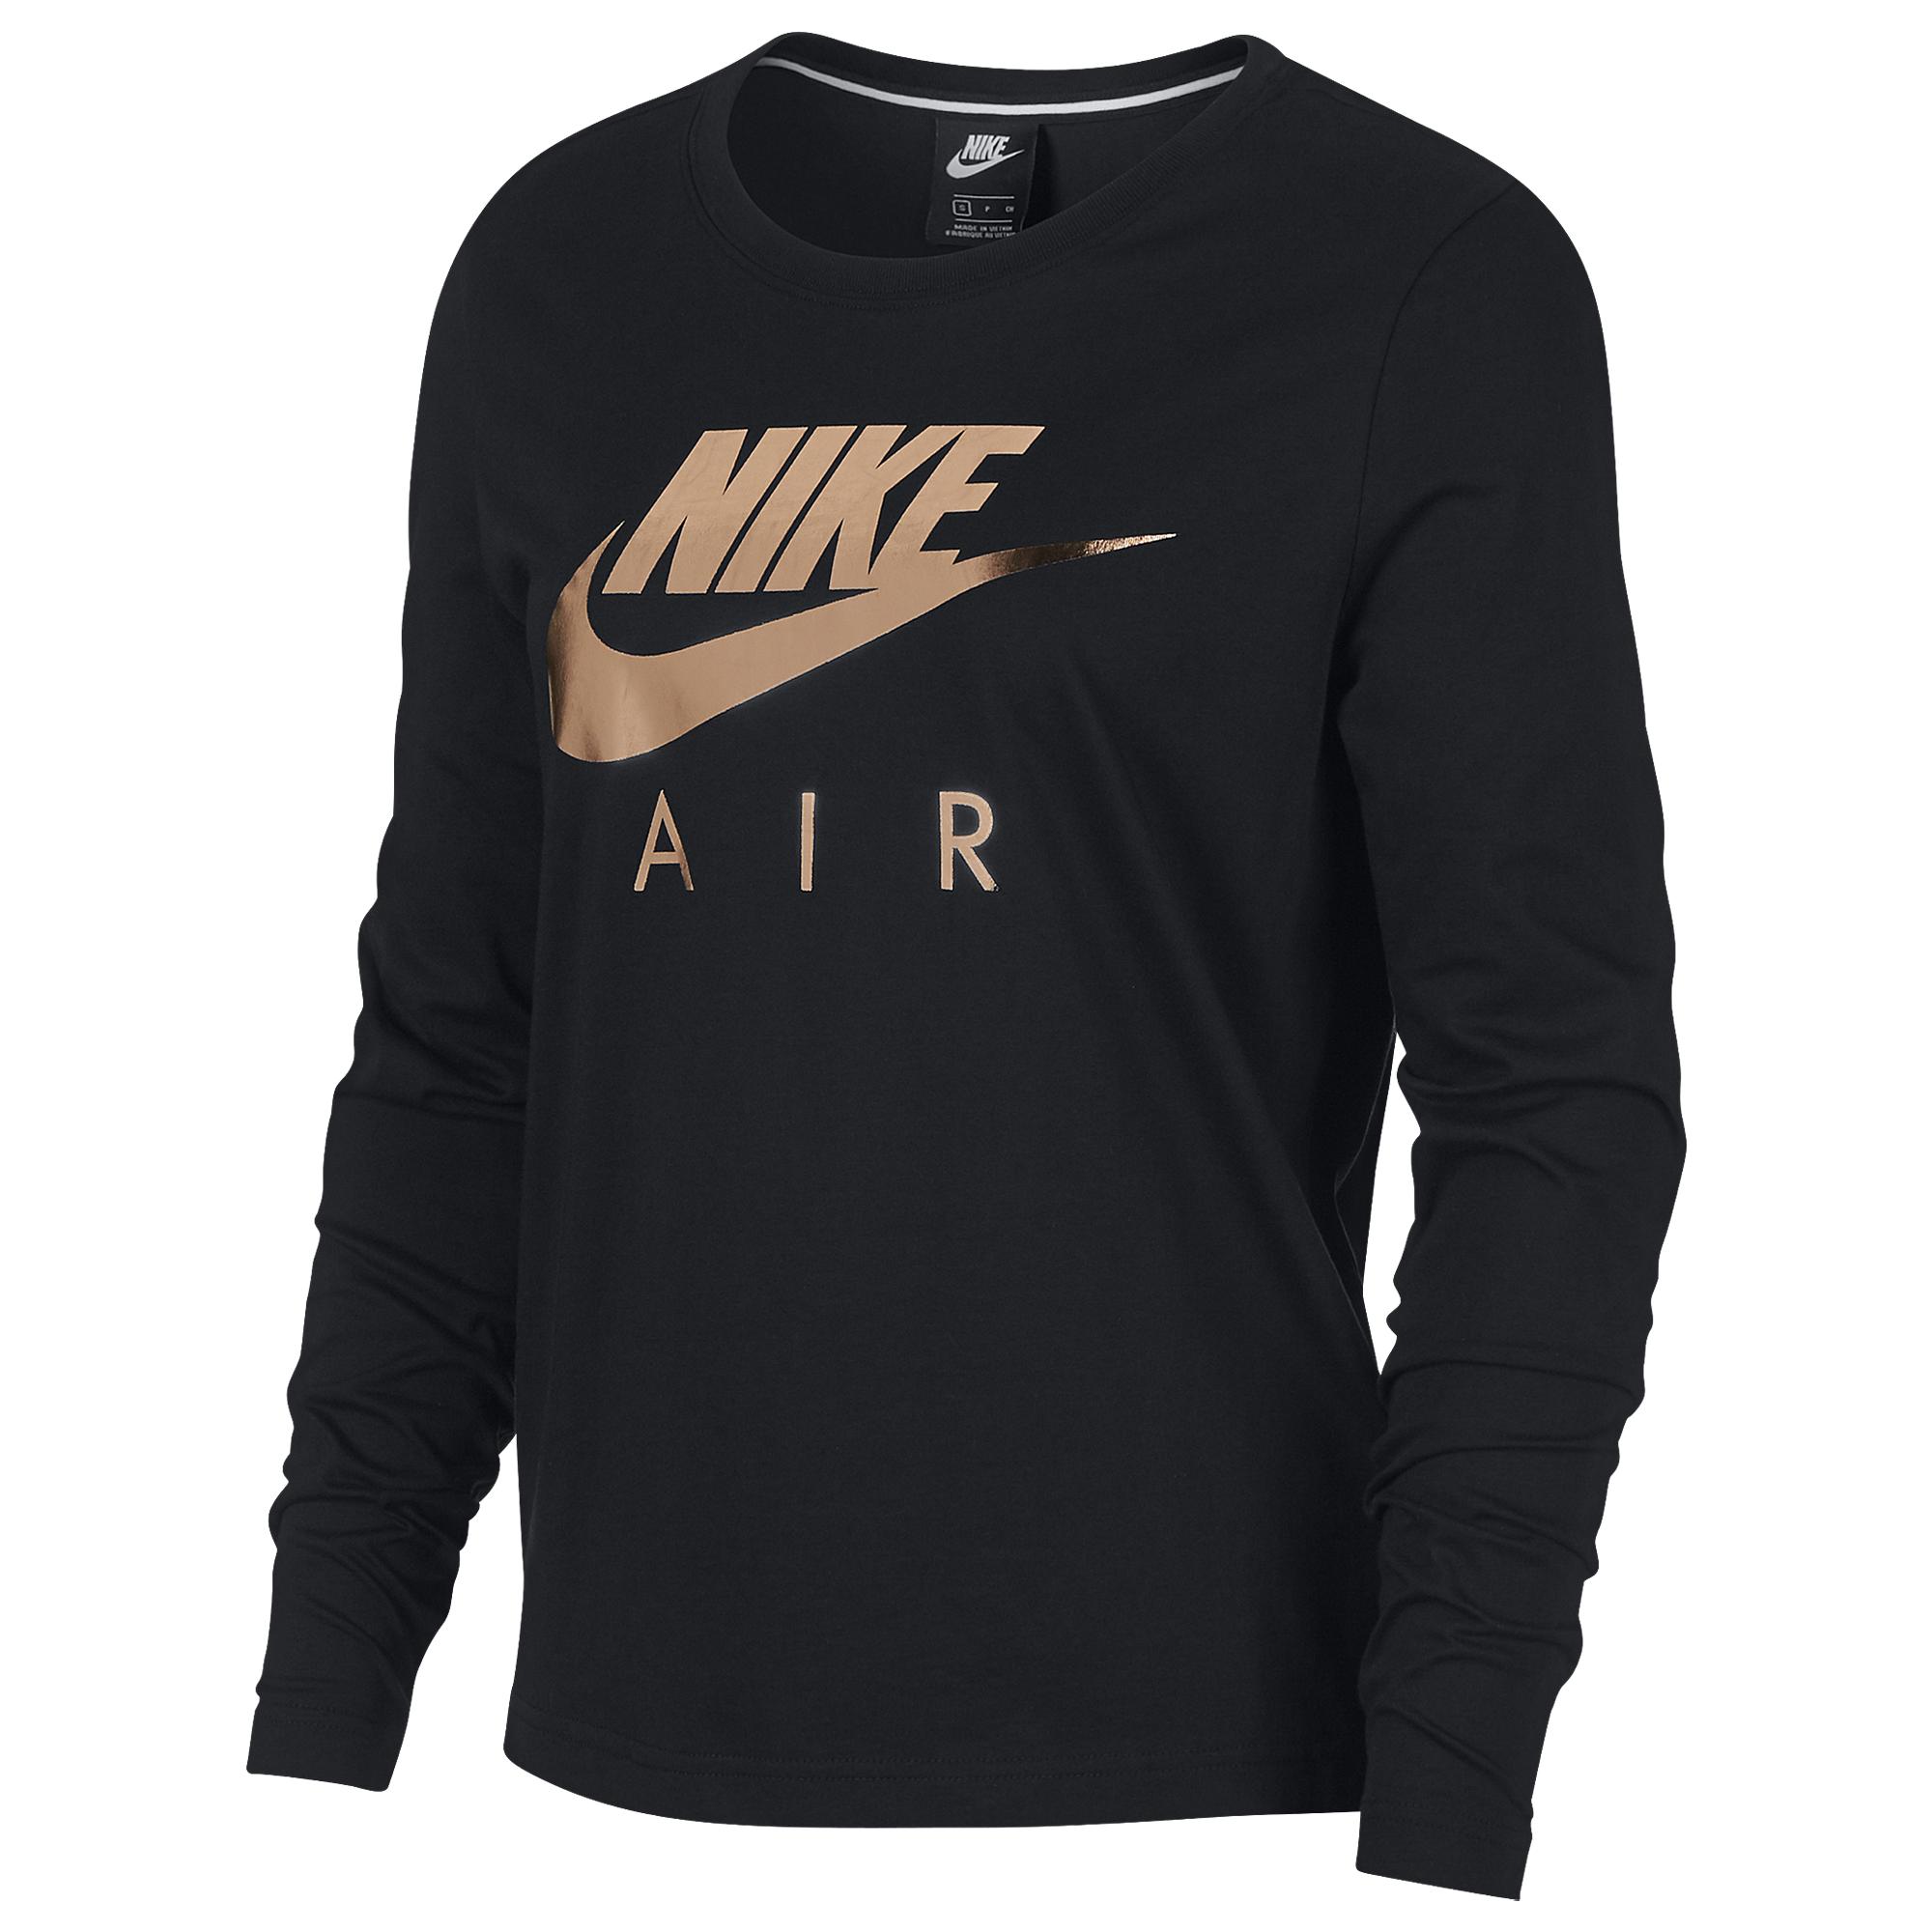 Buy > black nike shirt with gold > in stock